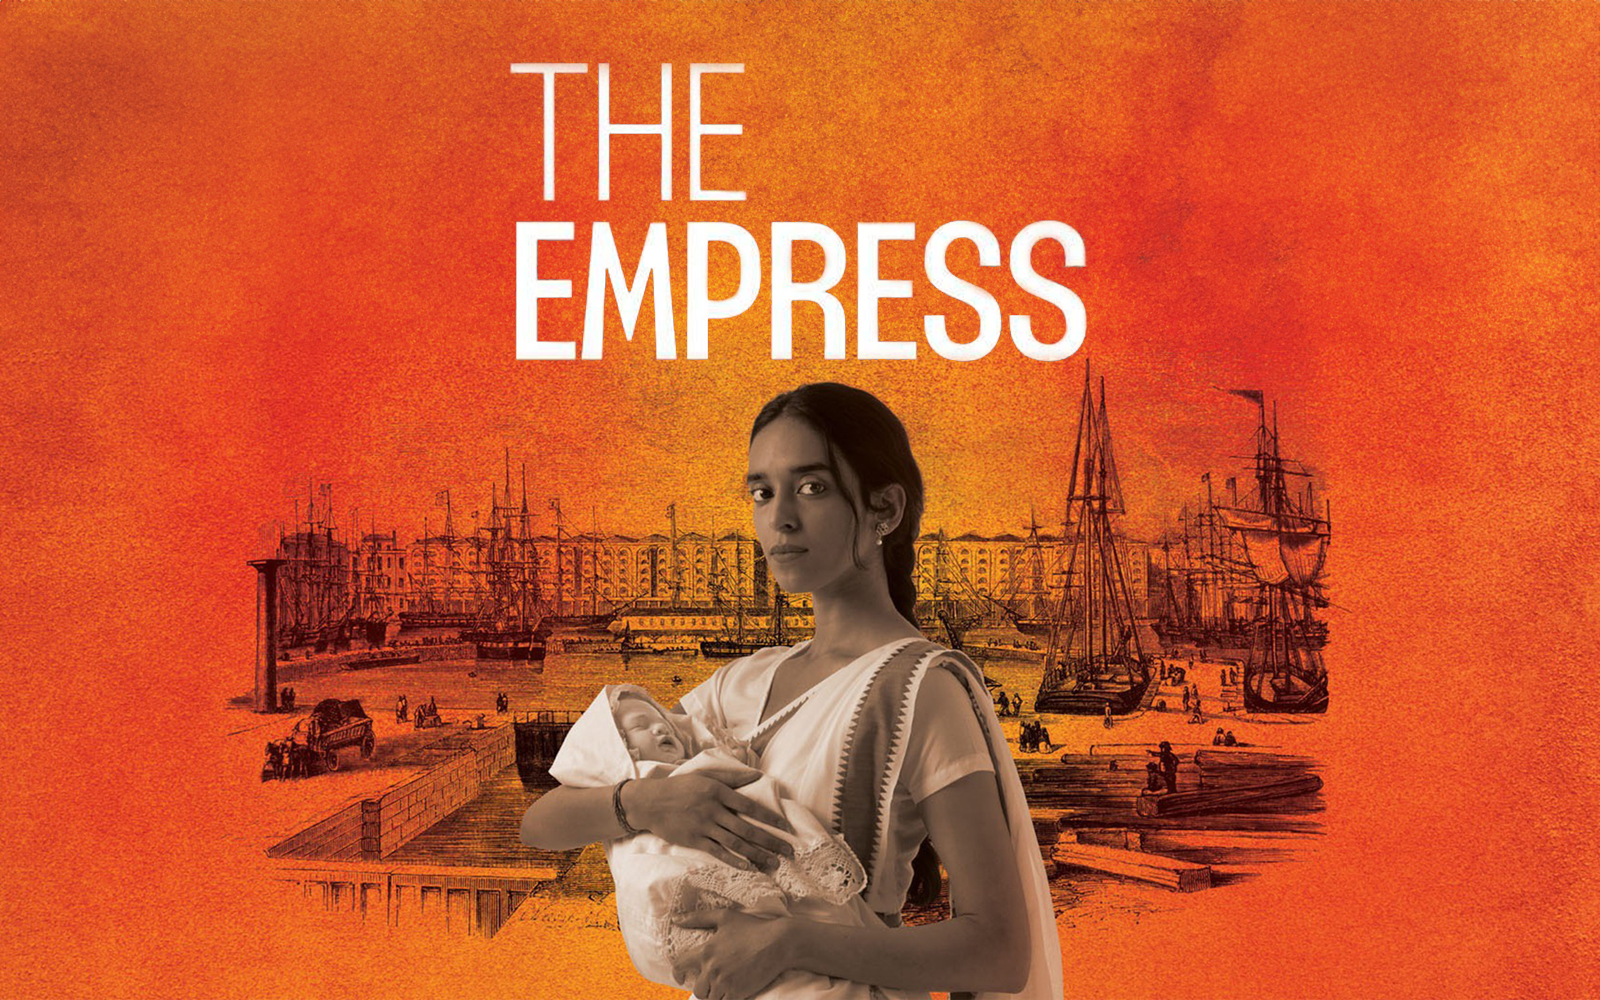 Image of The Empress